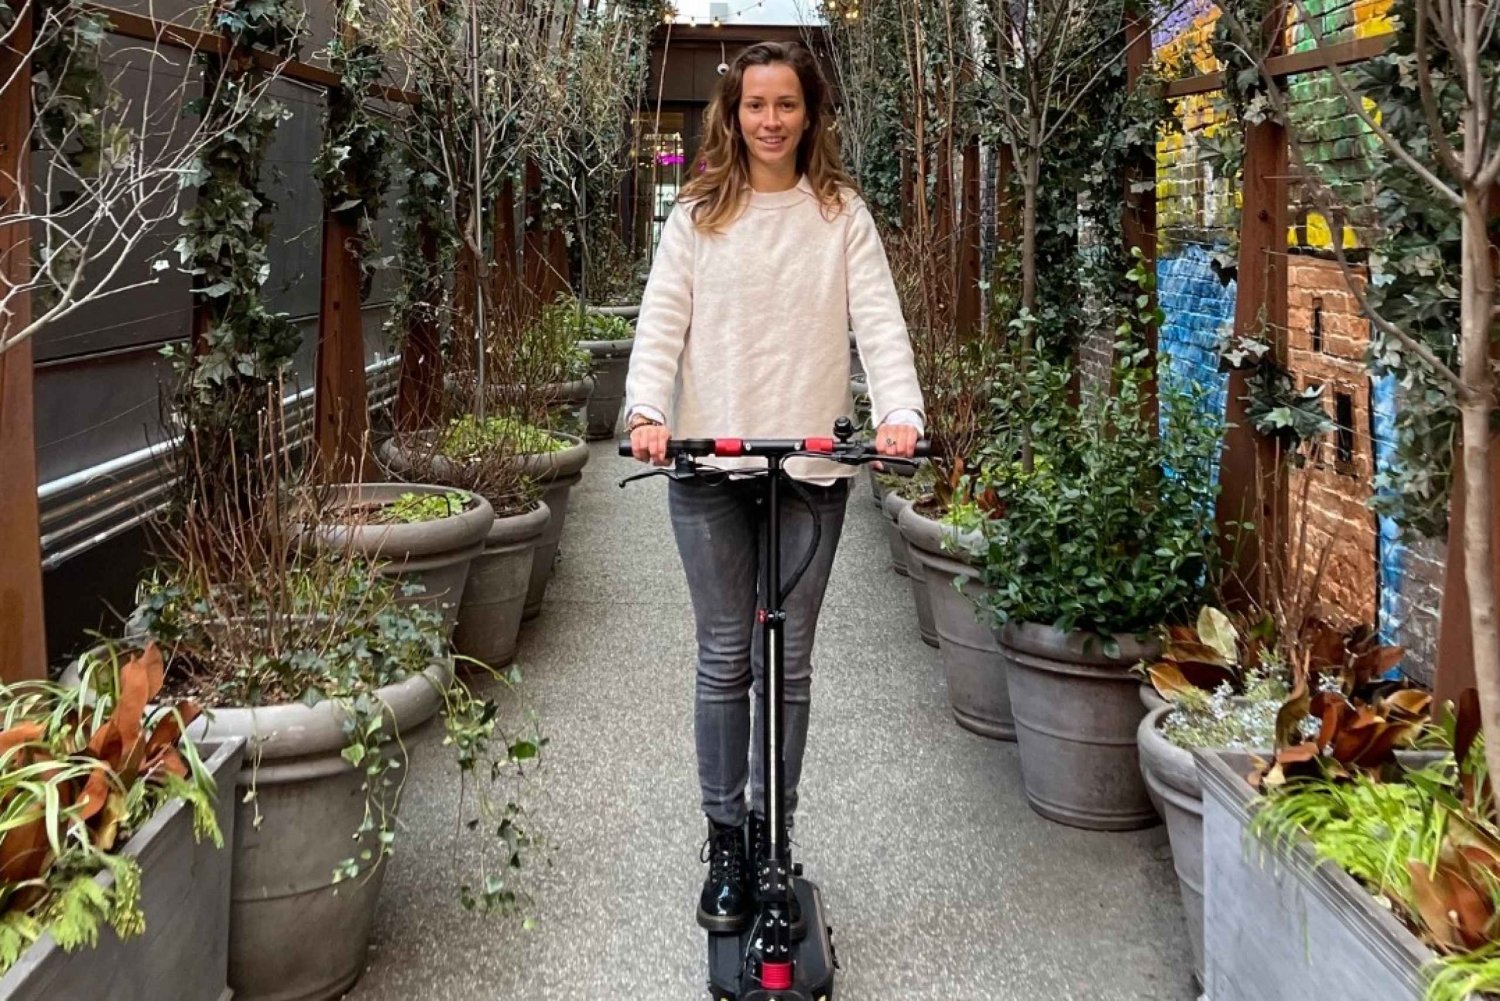 Electrical Scooter Rentals in NYC